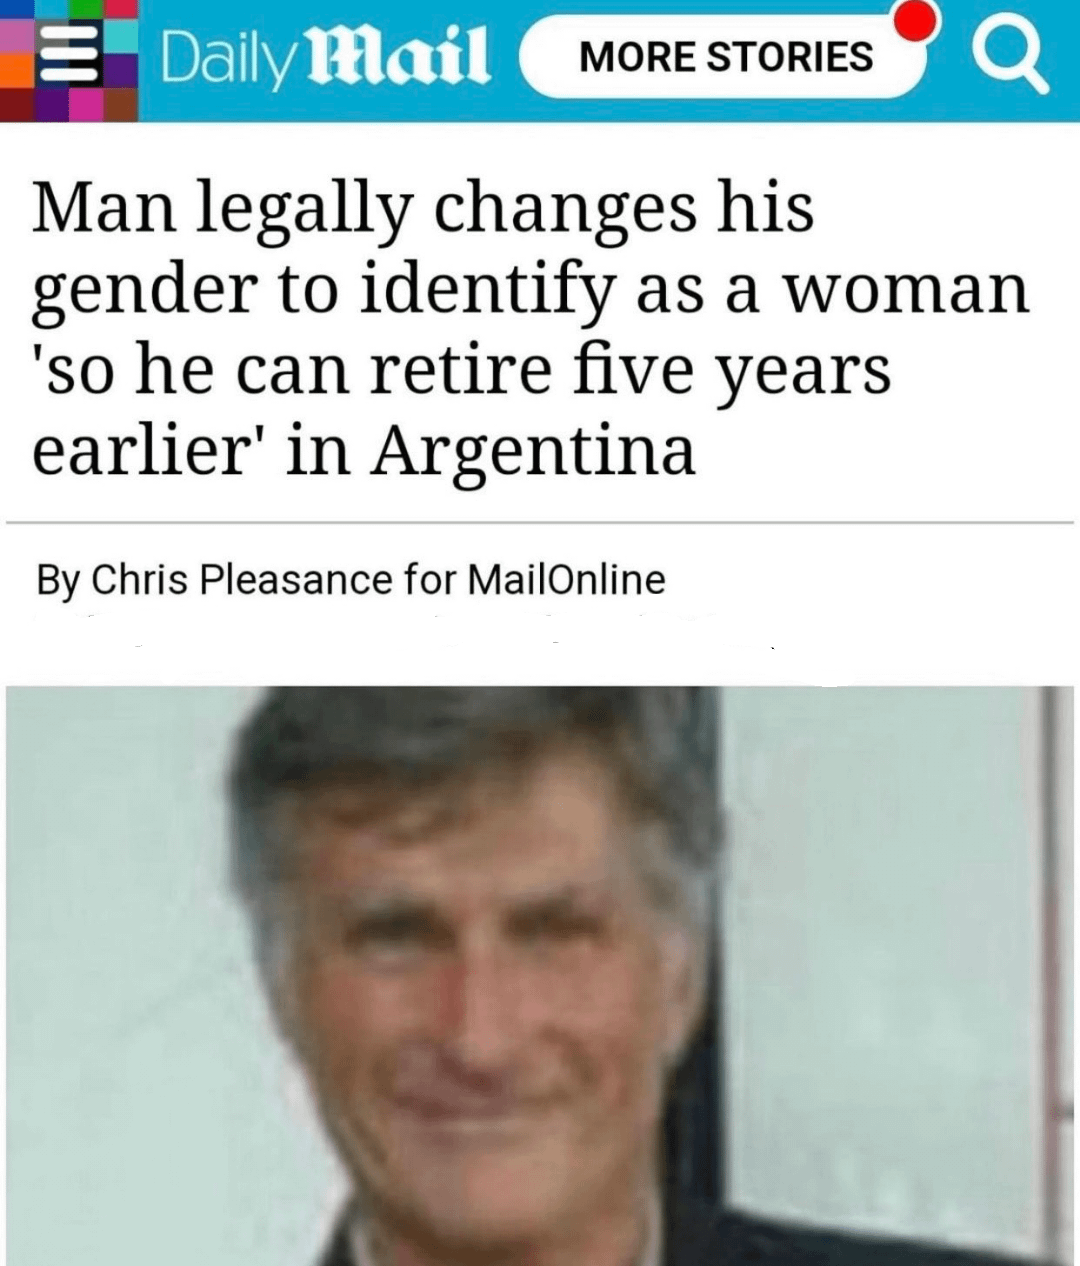 Daily Mail MORE STORIES Q Man legally changes his gender to identify as a woman 'so he can retire five years earlier' in Argentina By Chris Pleasance for MailOnline